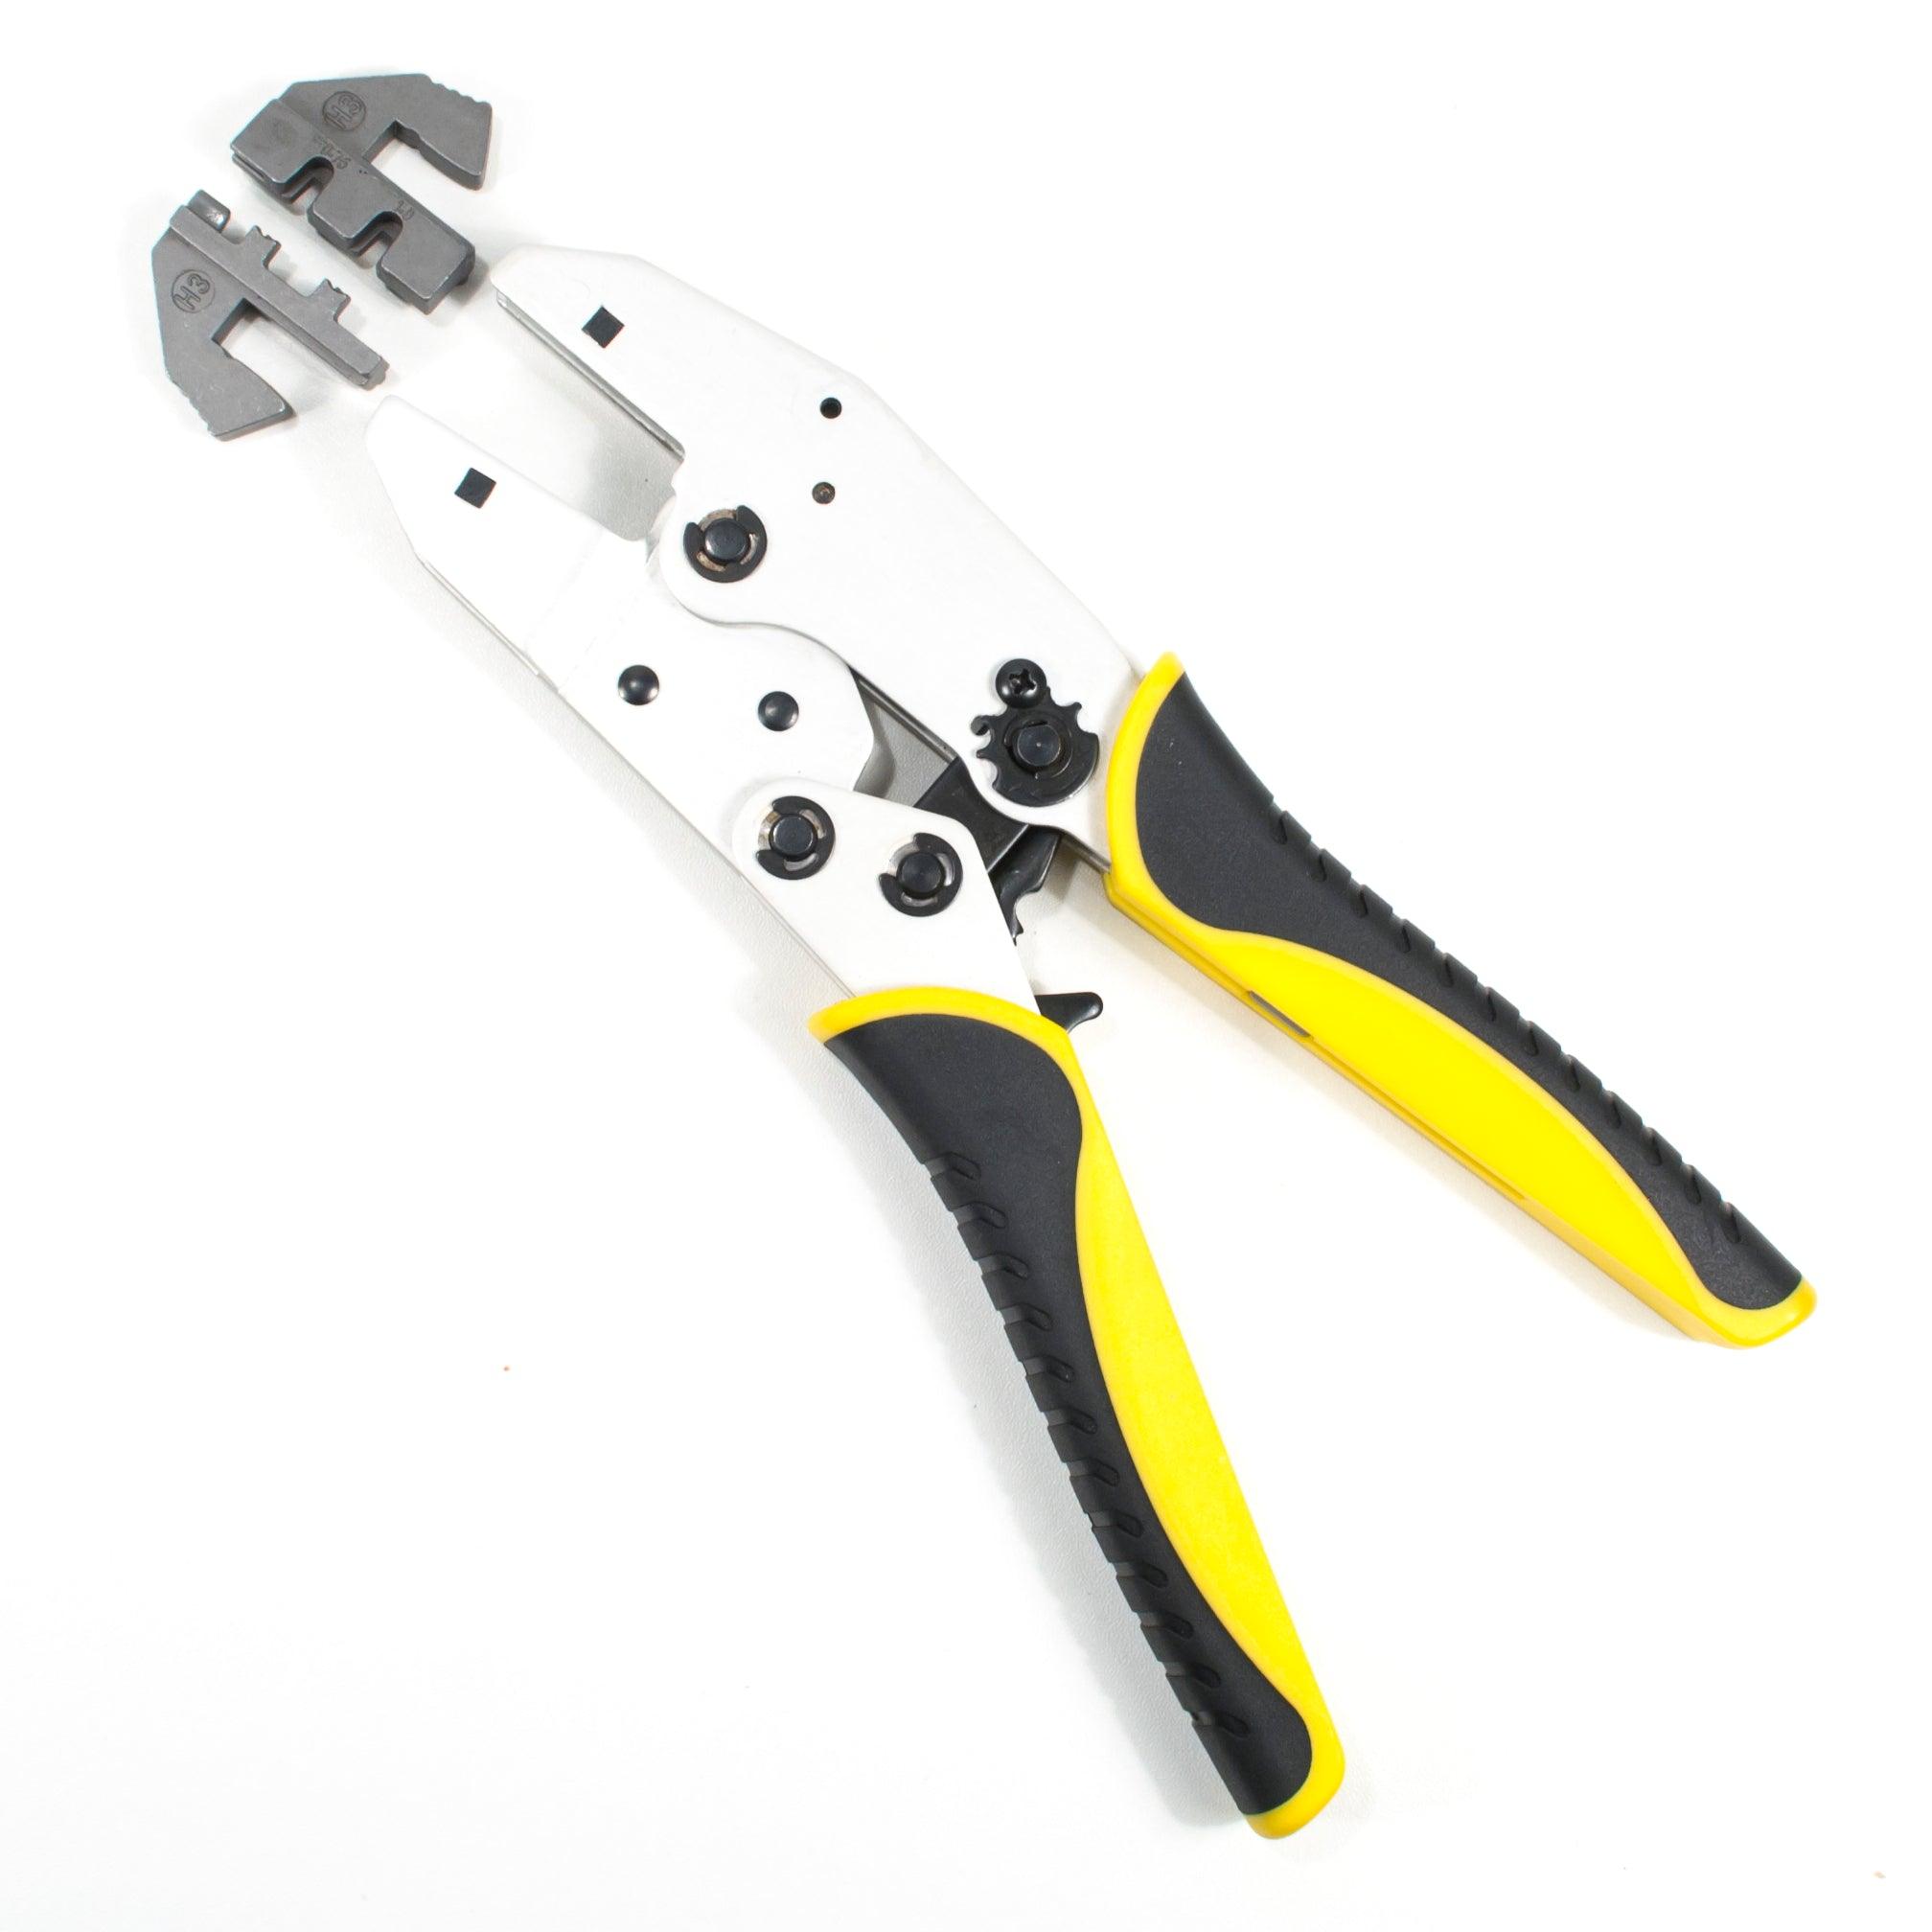 1.5 Superseal Connector Terminal Ratcheting Crimping Tool- Includes 2 Dies - Tool Guy Republic